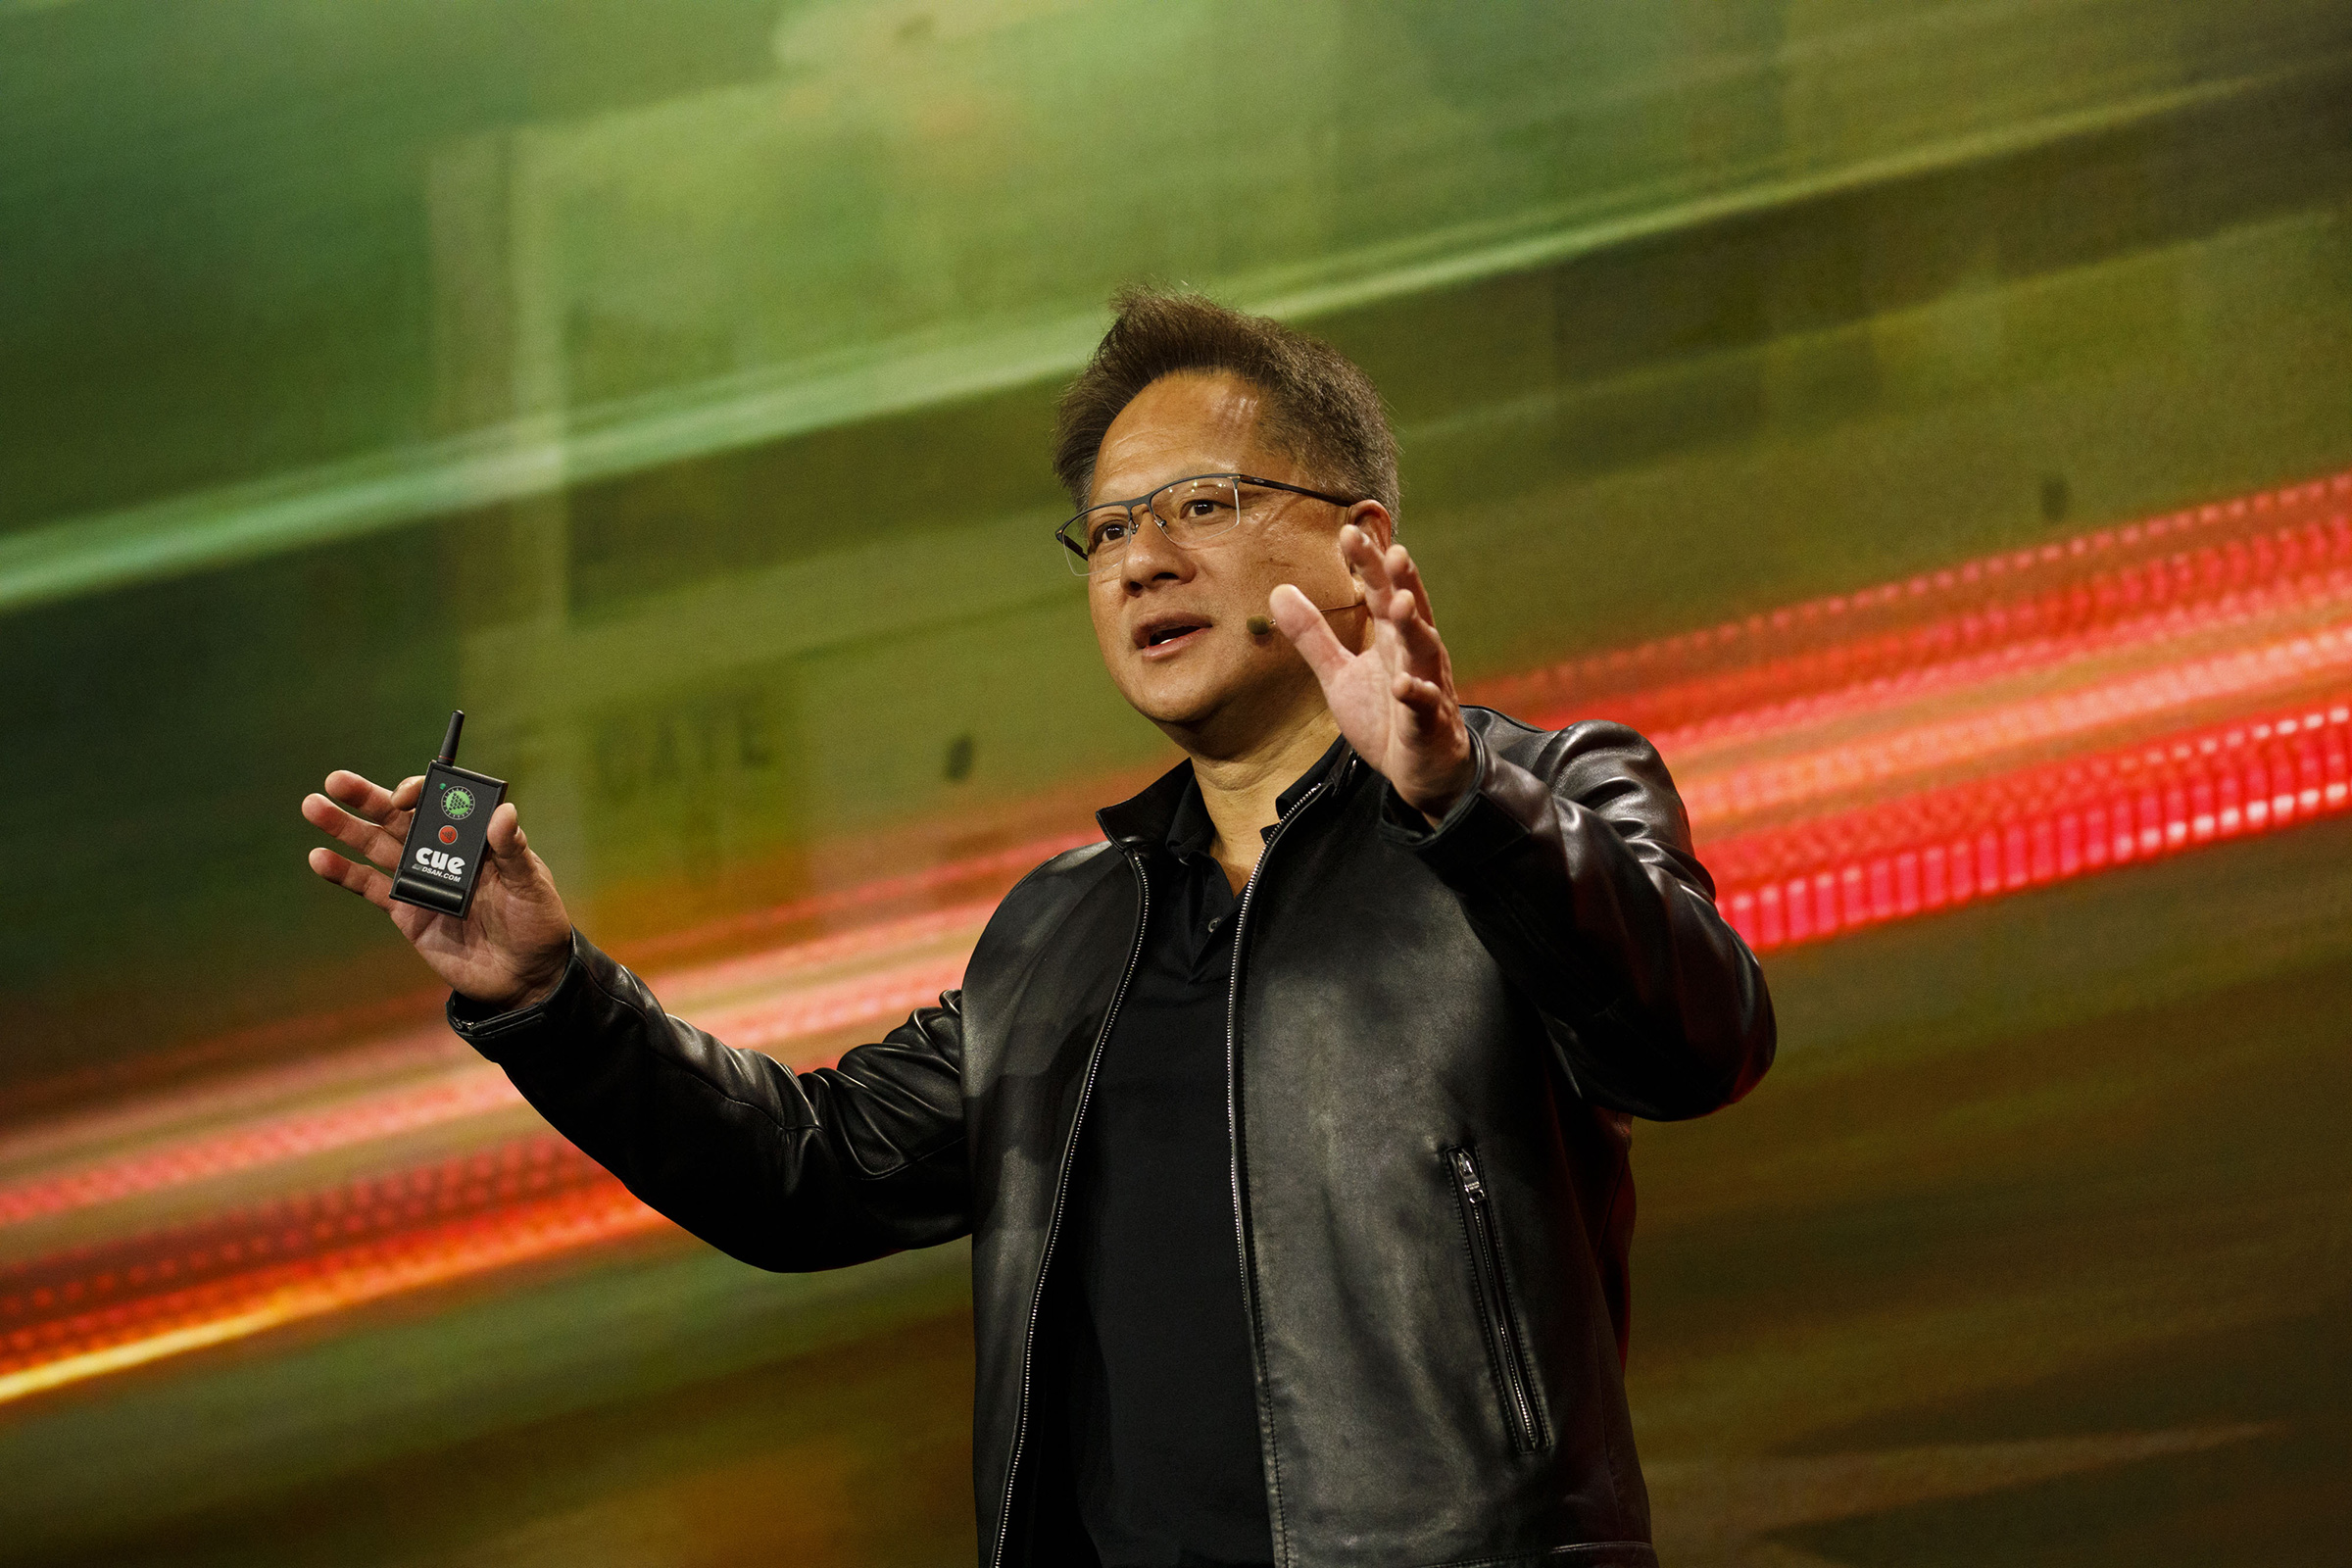 Jensen Huang is co-founder, President and CEO of Nvidia (Patrick T. Fallon—Bloomberg/Getty Images)